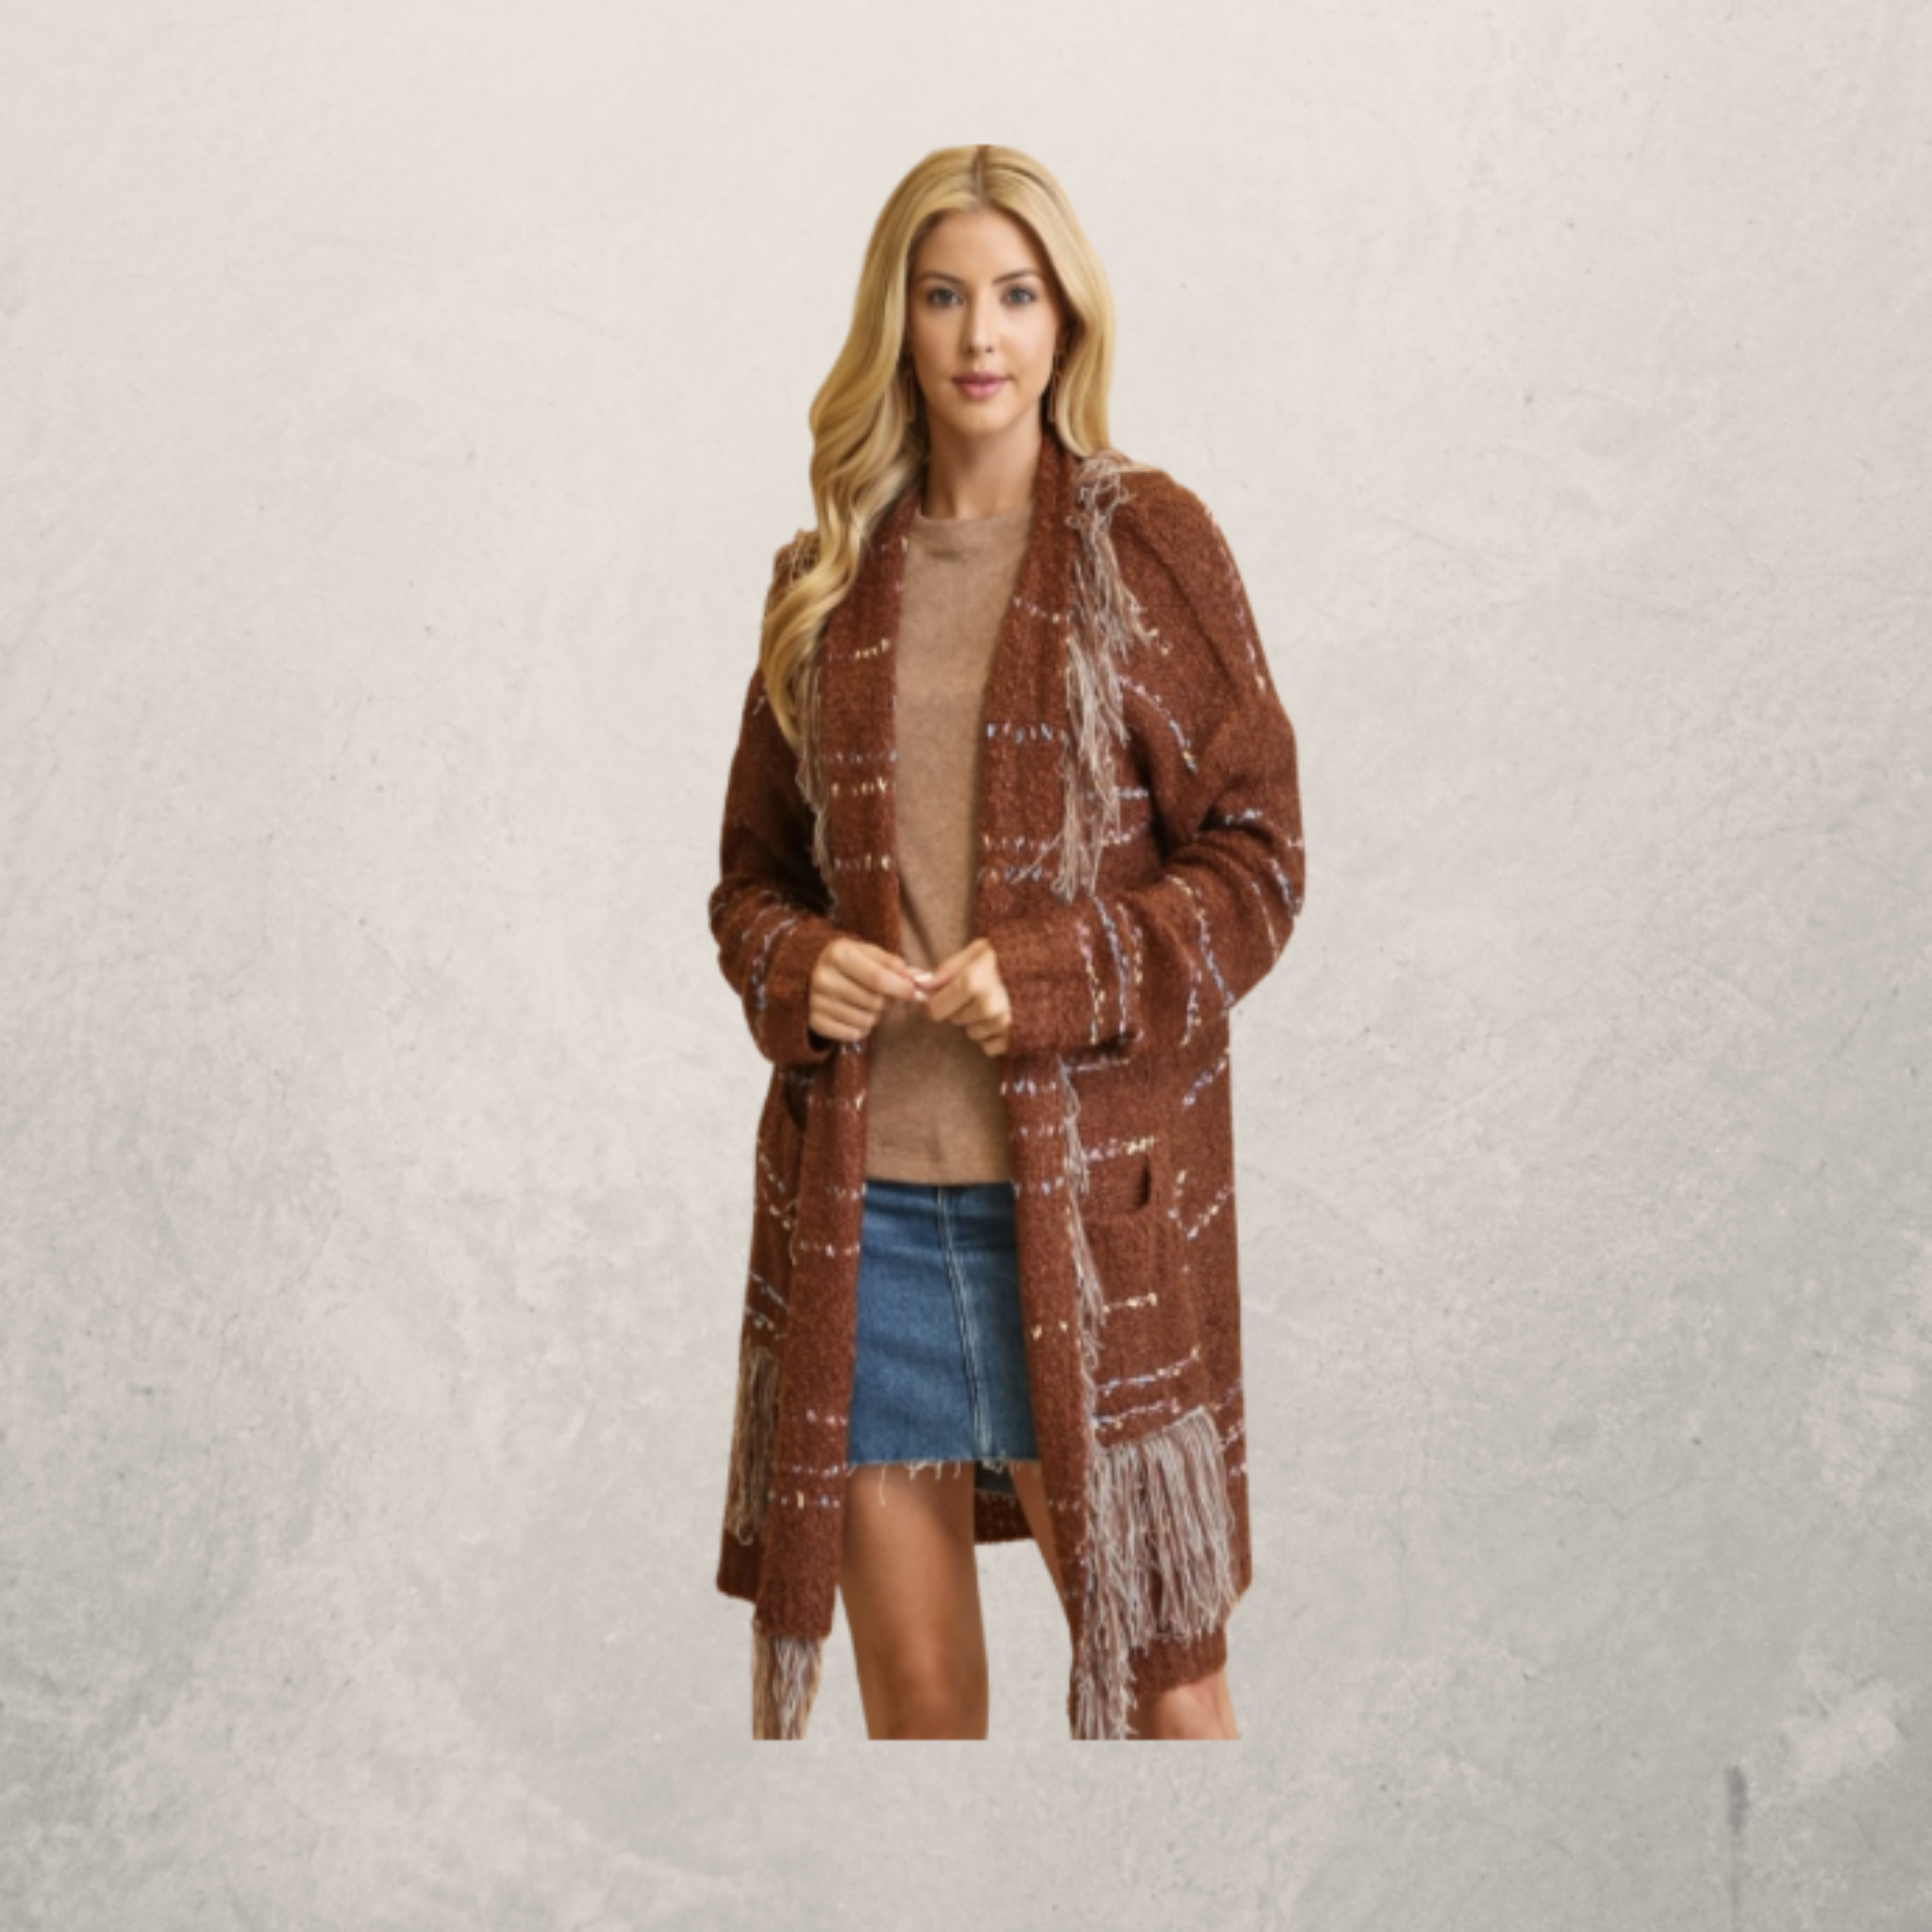 Multi Thread Mixed Sweater Cardigan with Fringe Detail and Pockets